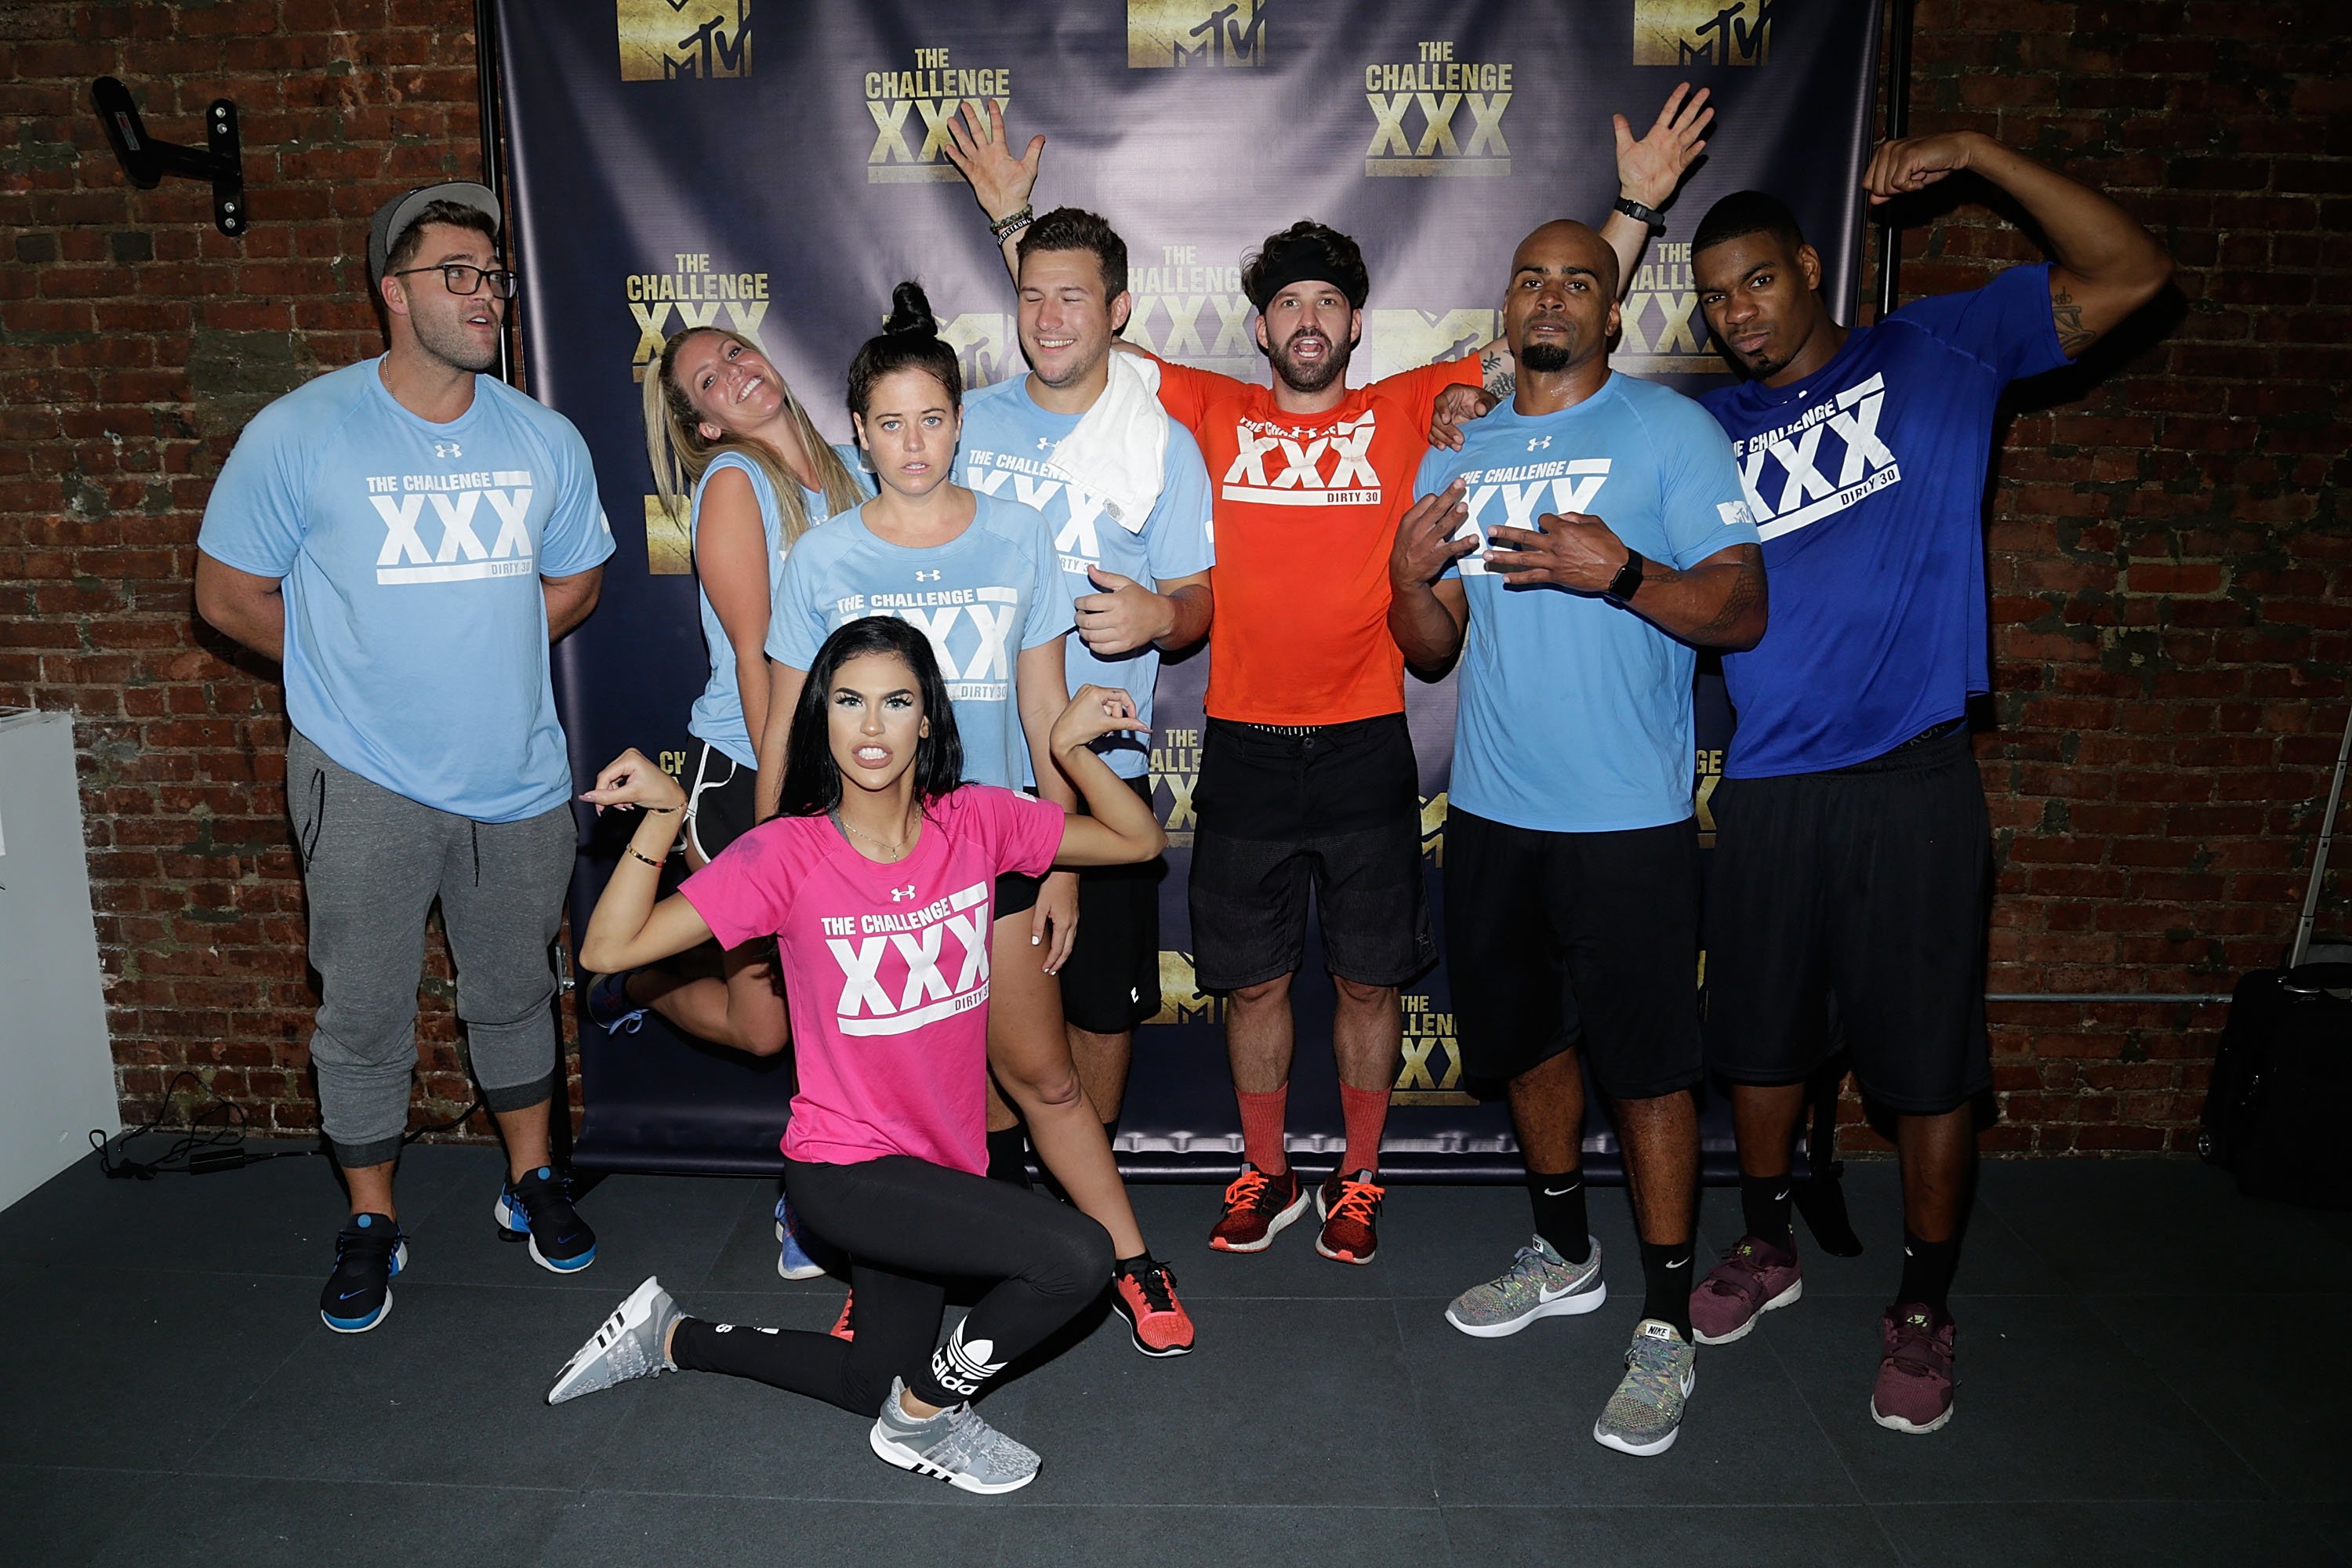 Players from MTV's 'The Challenge' standing together and posing at 'The Challenge XXX': Ultimate Fan Experience 